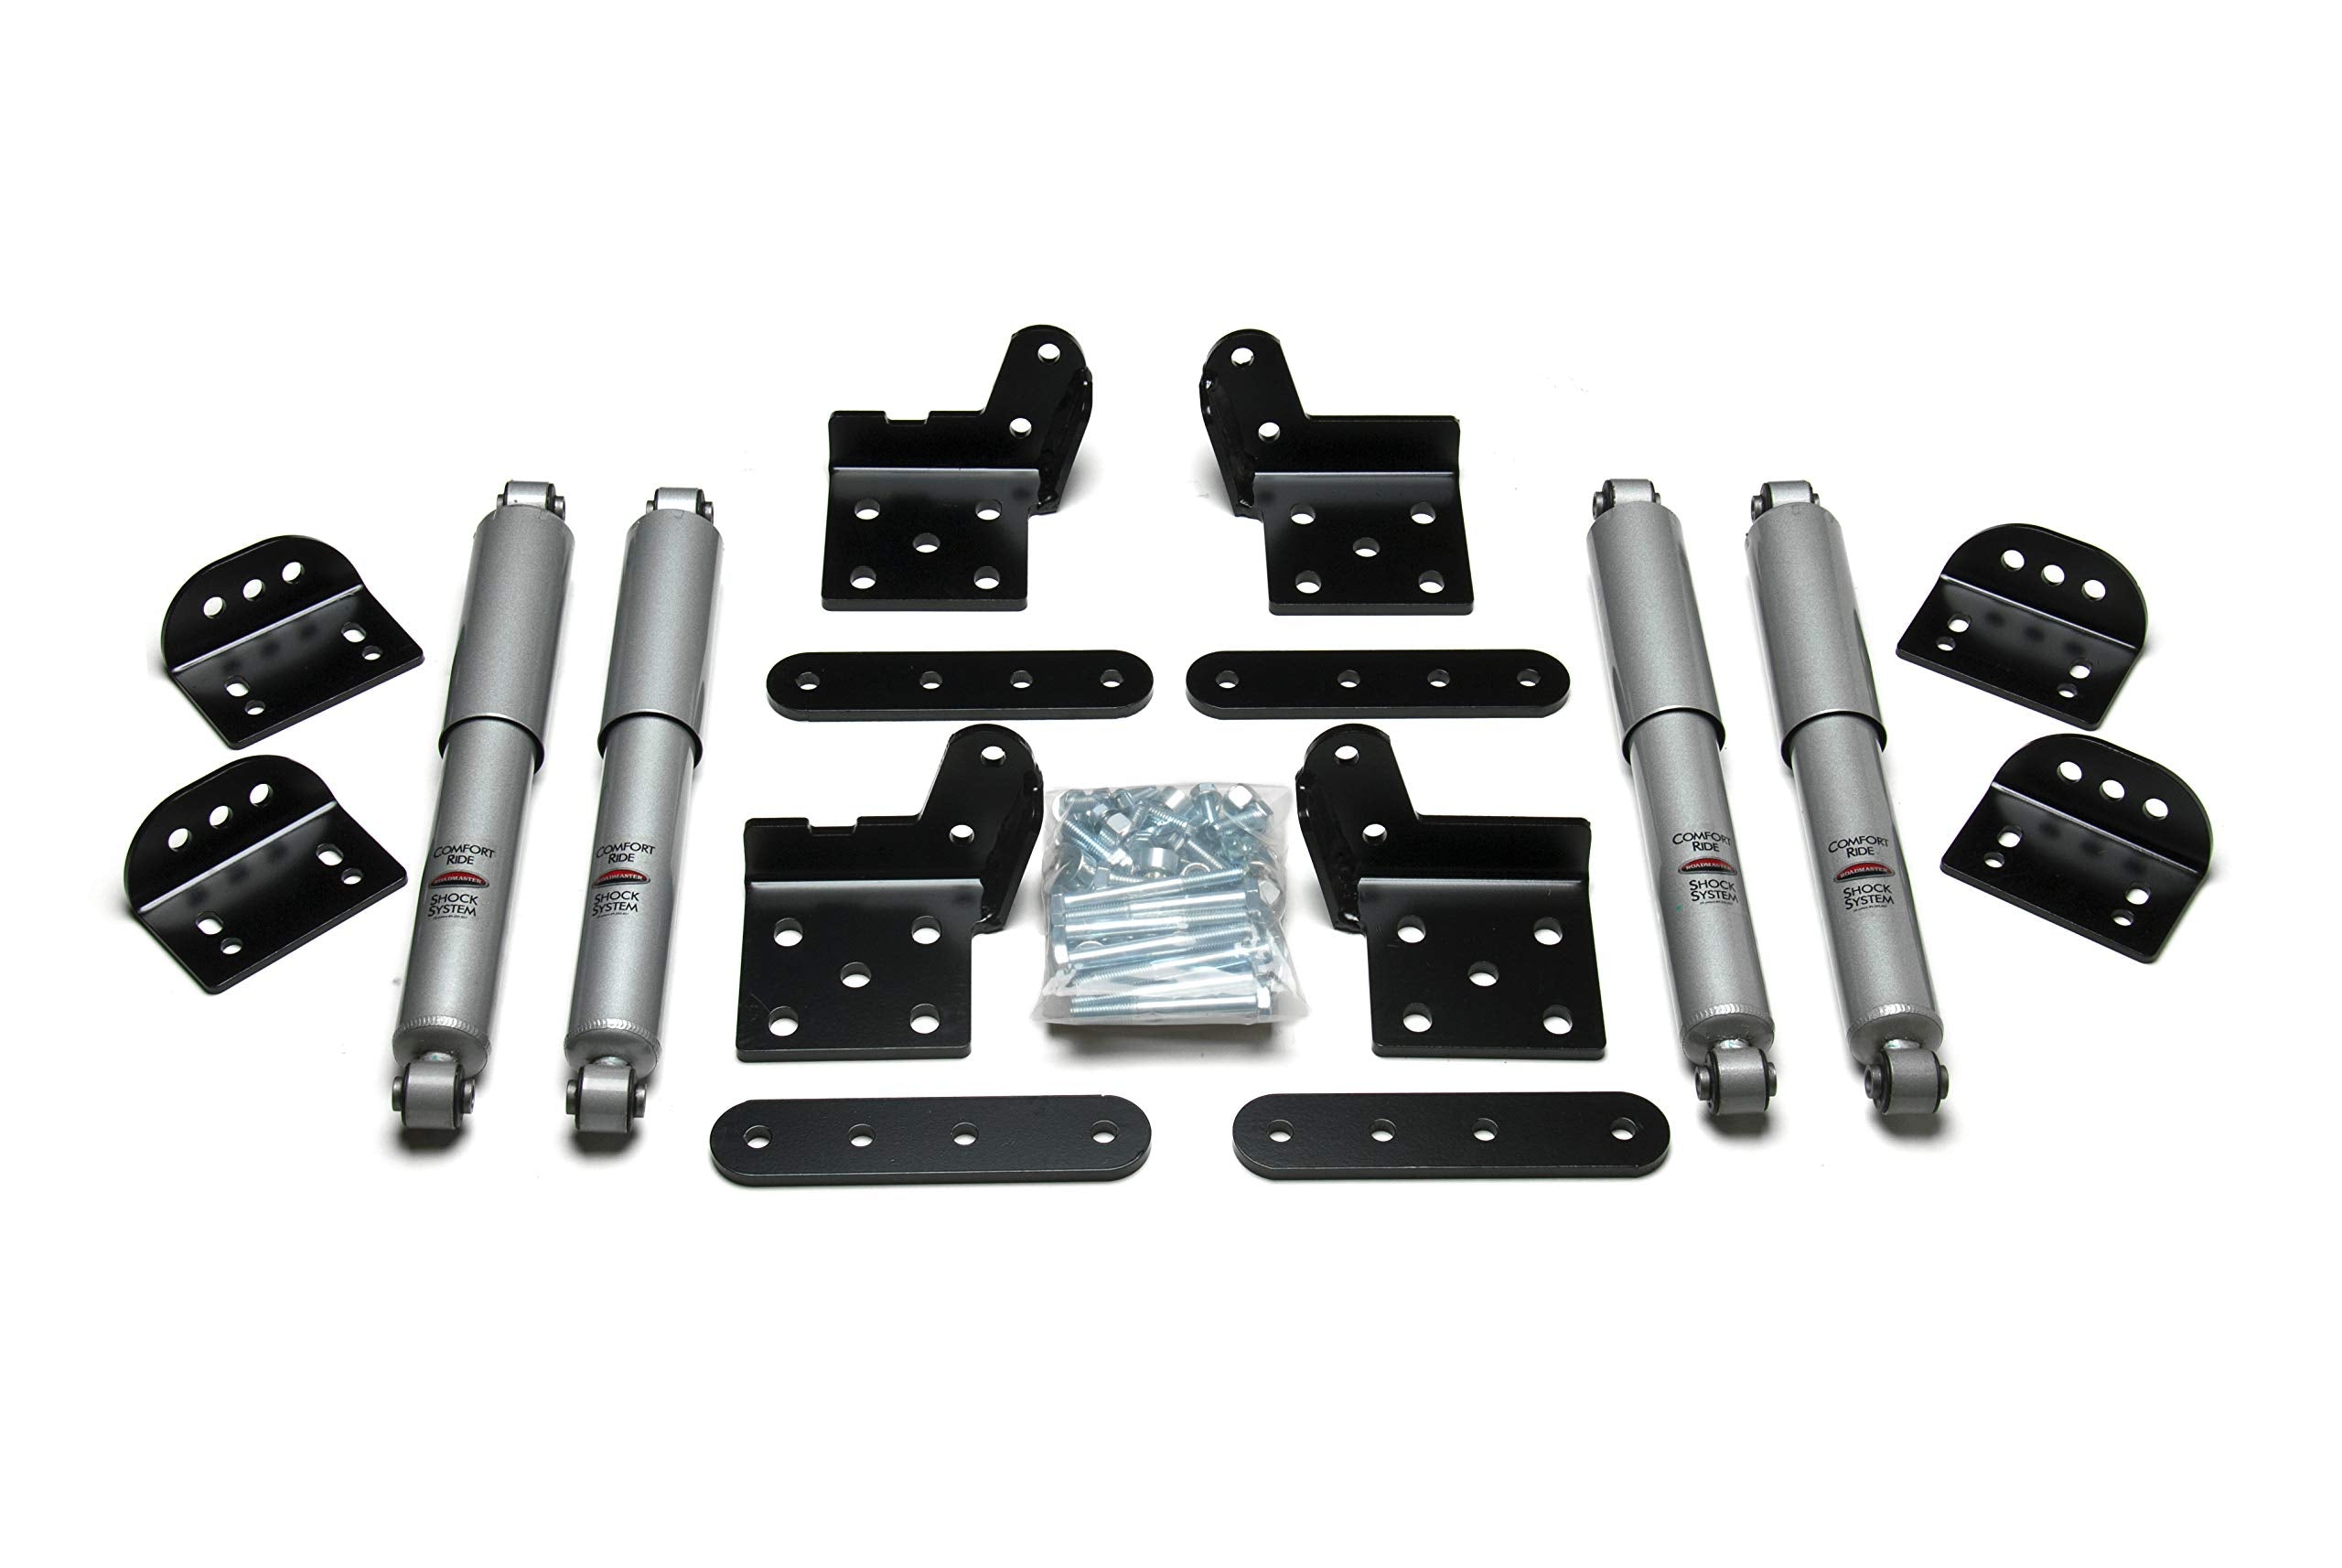 Roadmaster 2450 Comfort Ride Shock Absorber System for 2-3/8 Inch Tandem Axle Trailers and Fifth Wheels